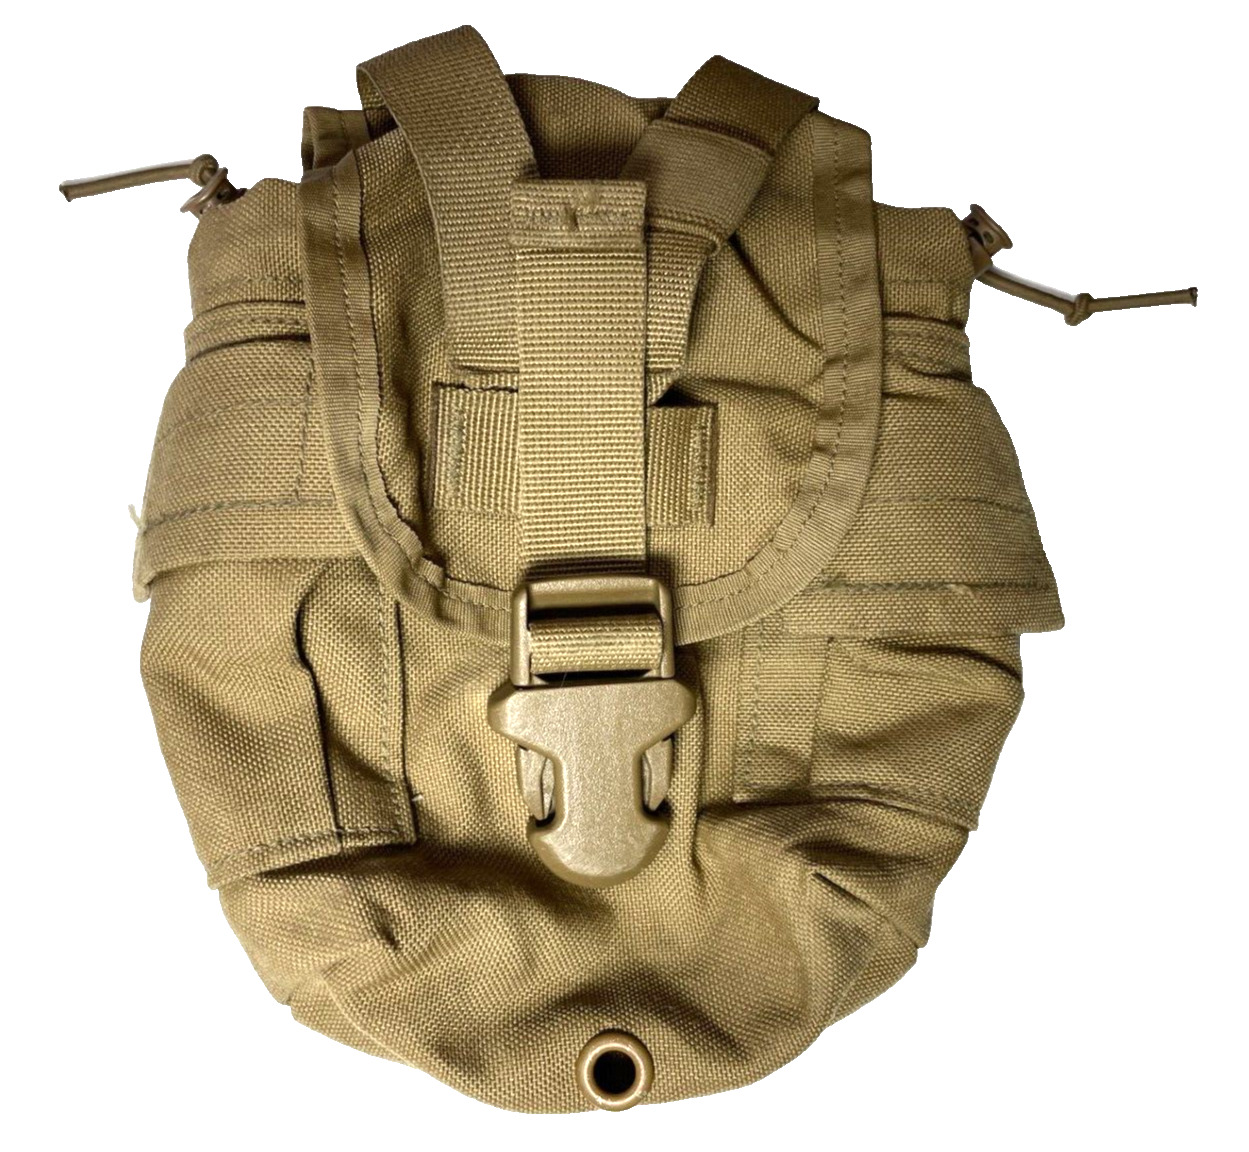 USGI Military USMC 1QT MOLLE Coyote CANTEEN COVER Pouch 8465-01-532-2303 MINT